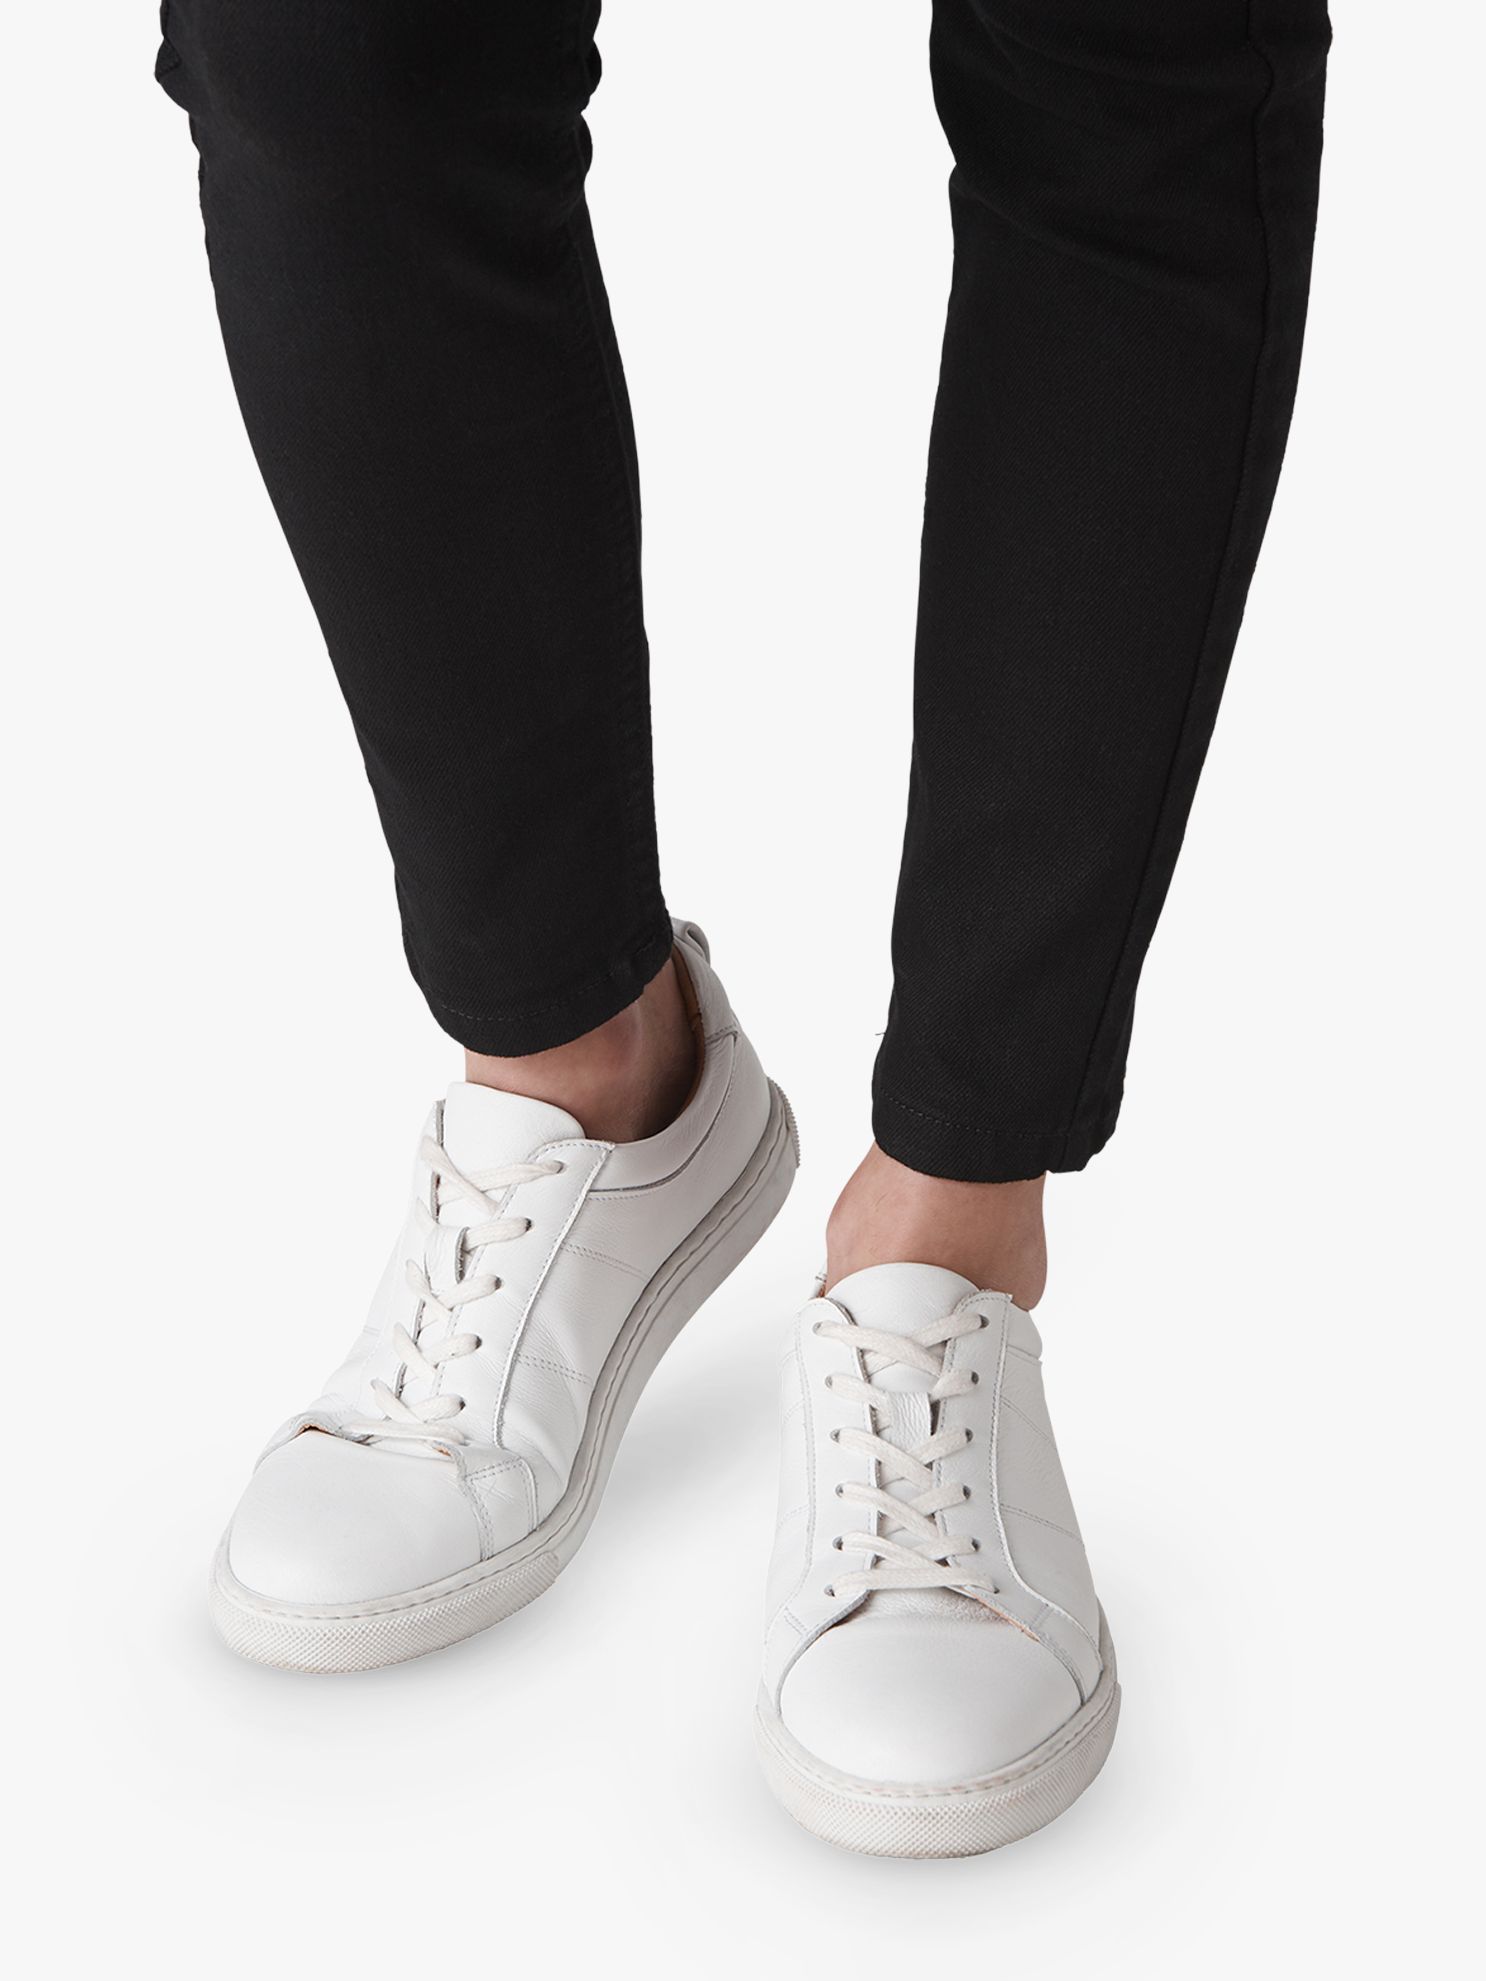 Buy Whistles Koki Lace Up Leather Trainers, White Online at johnlewis.com